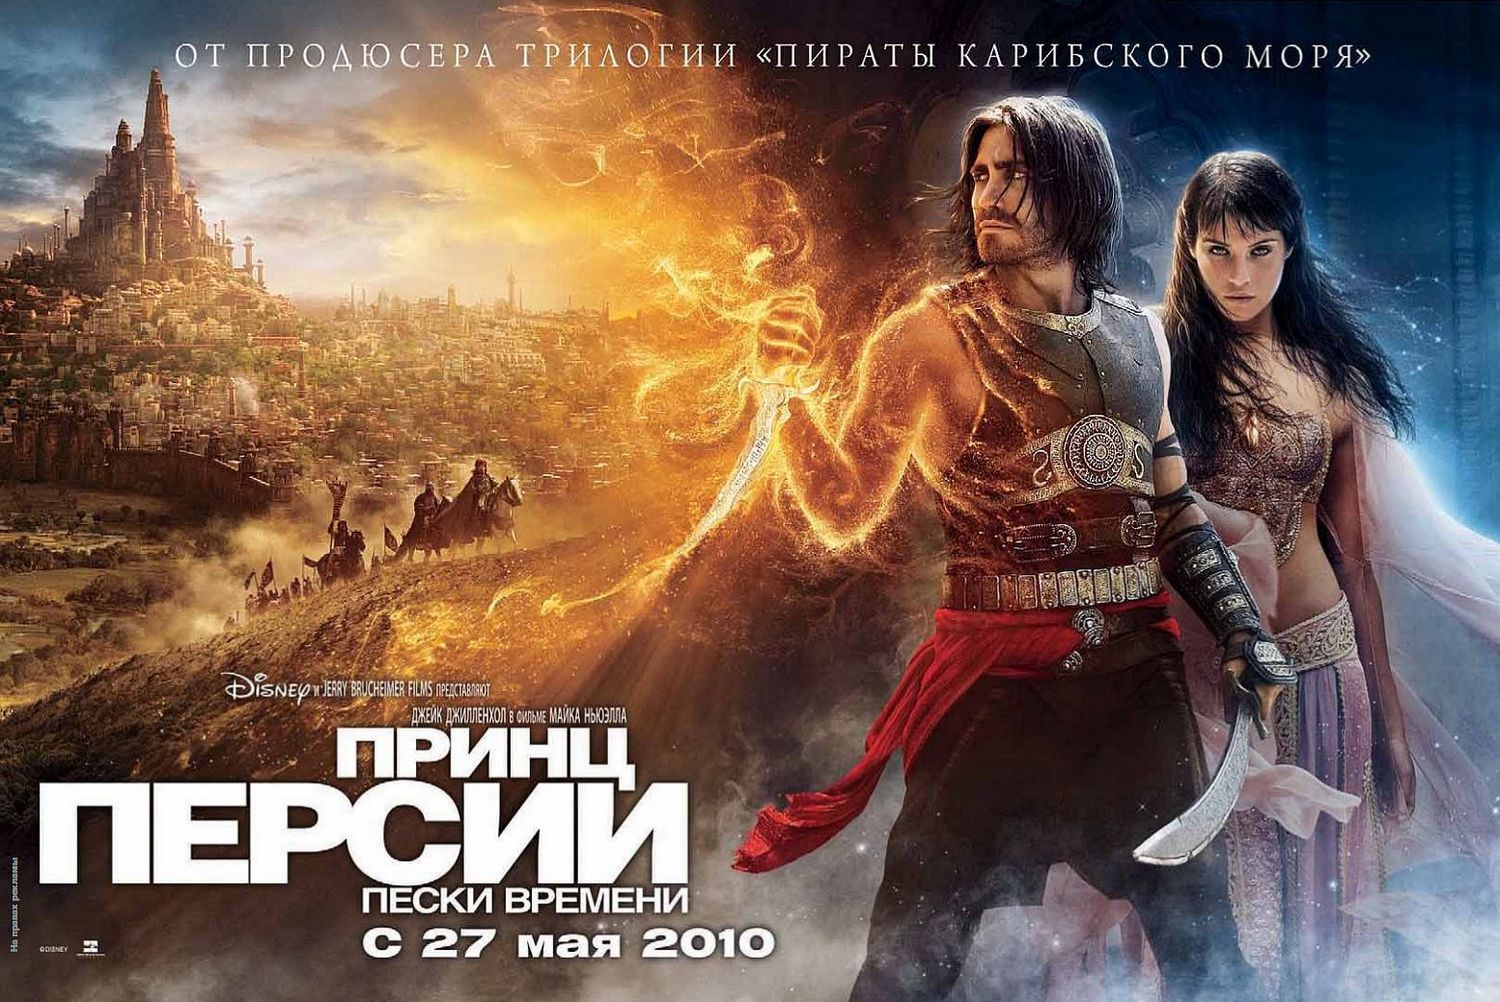 Prince of Persia: The Sands of Time (2010) - Photo Gallery - IMDb